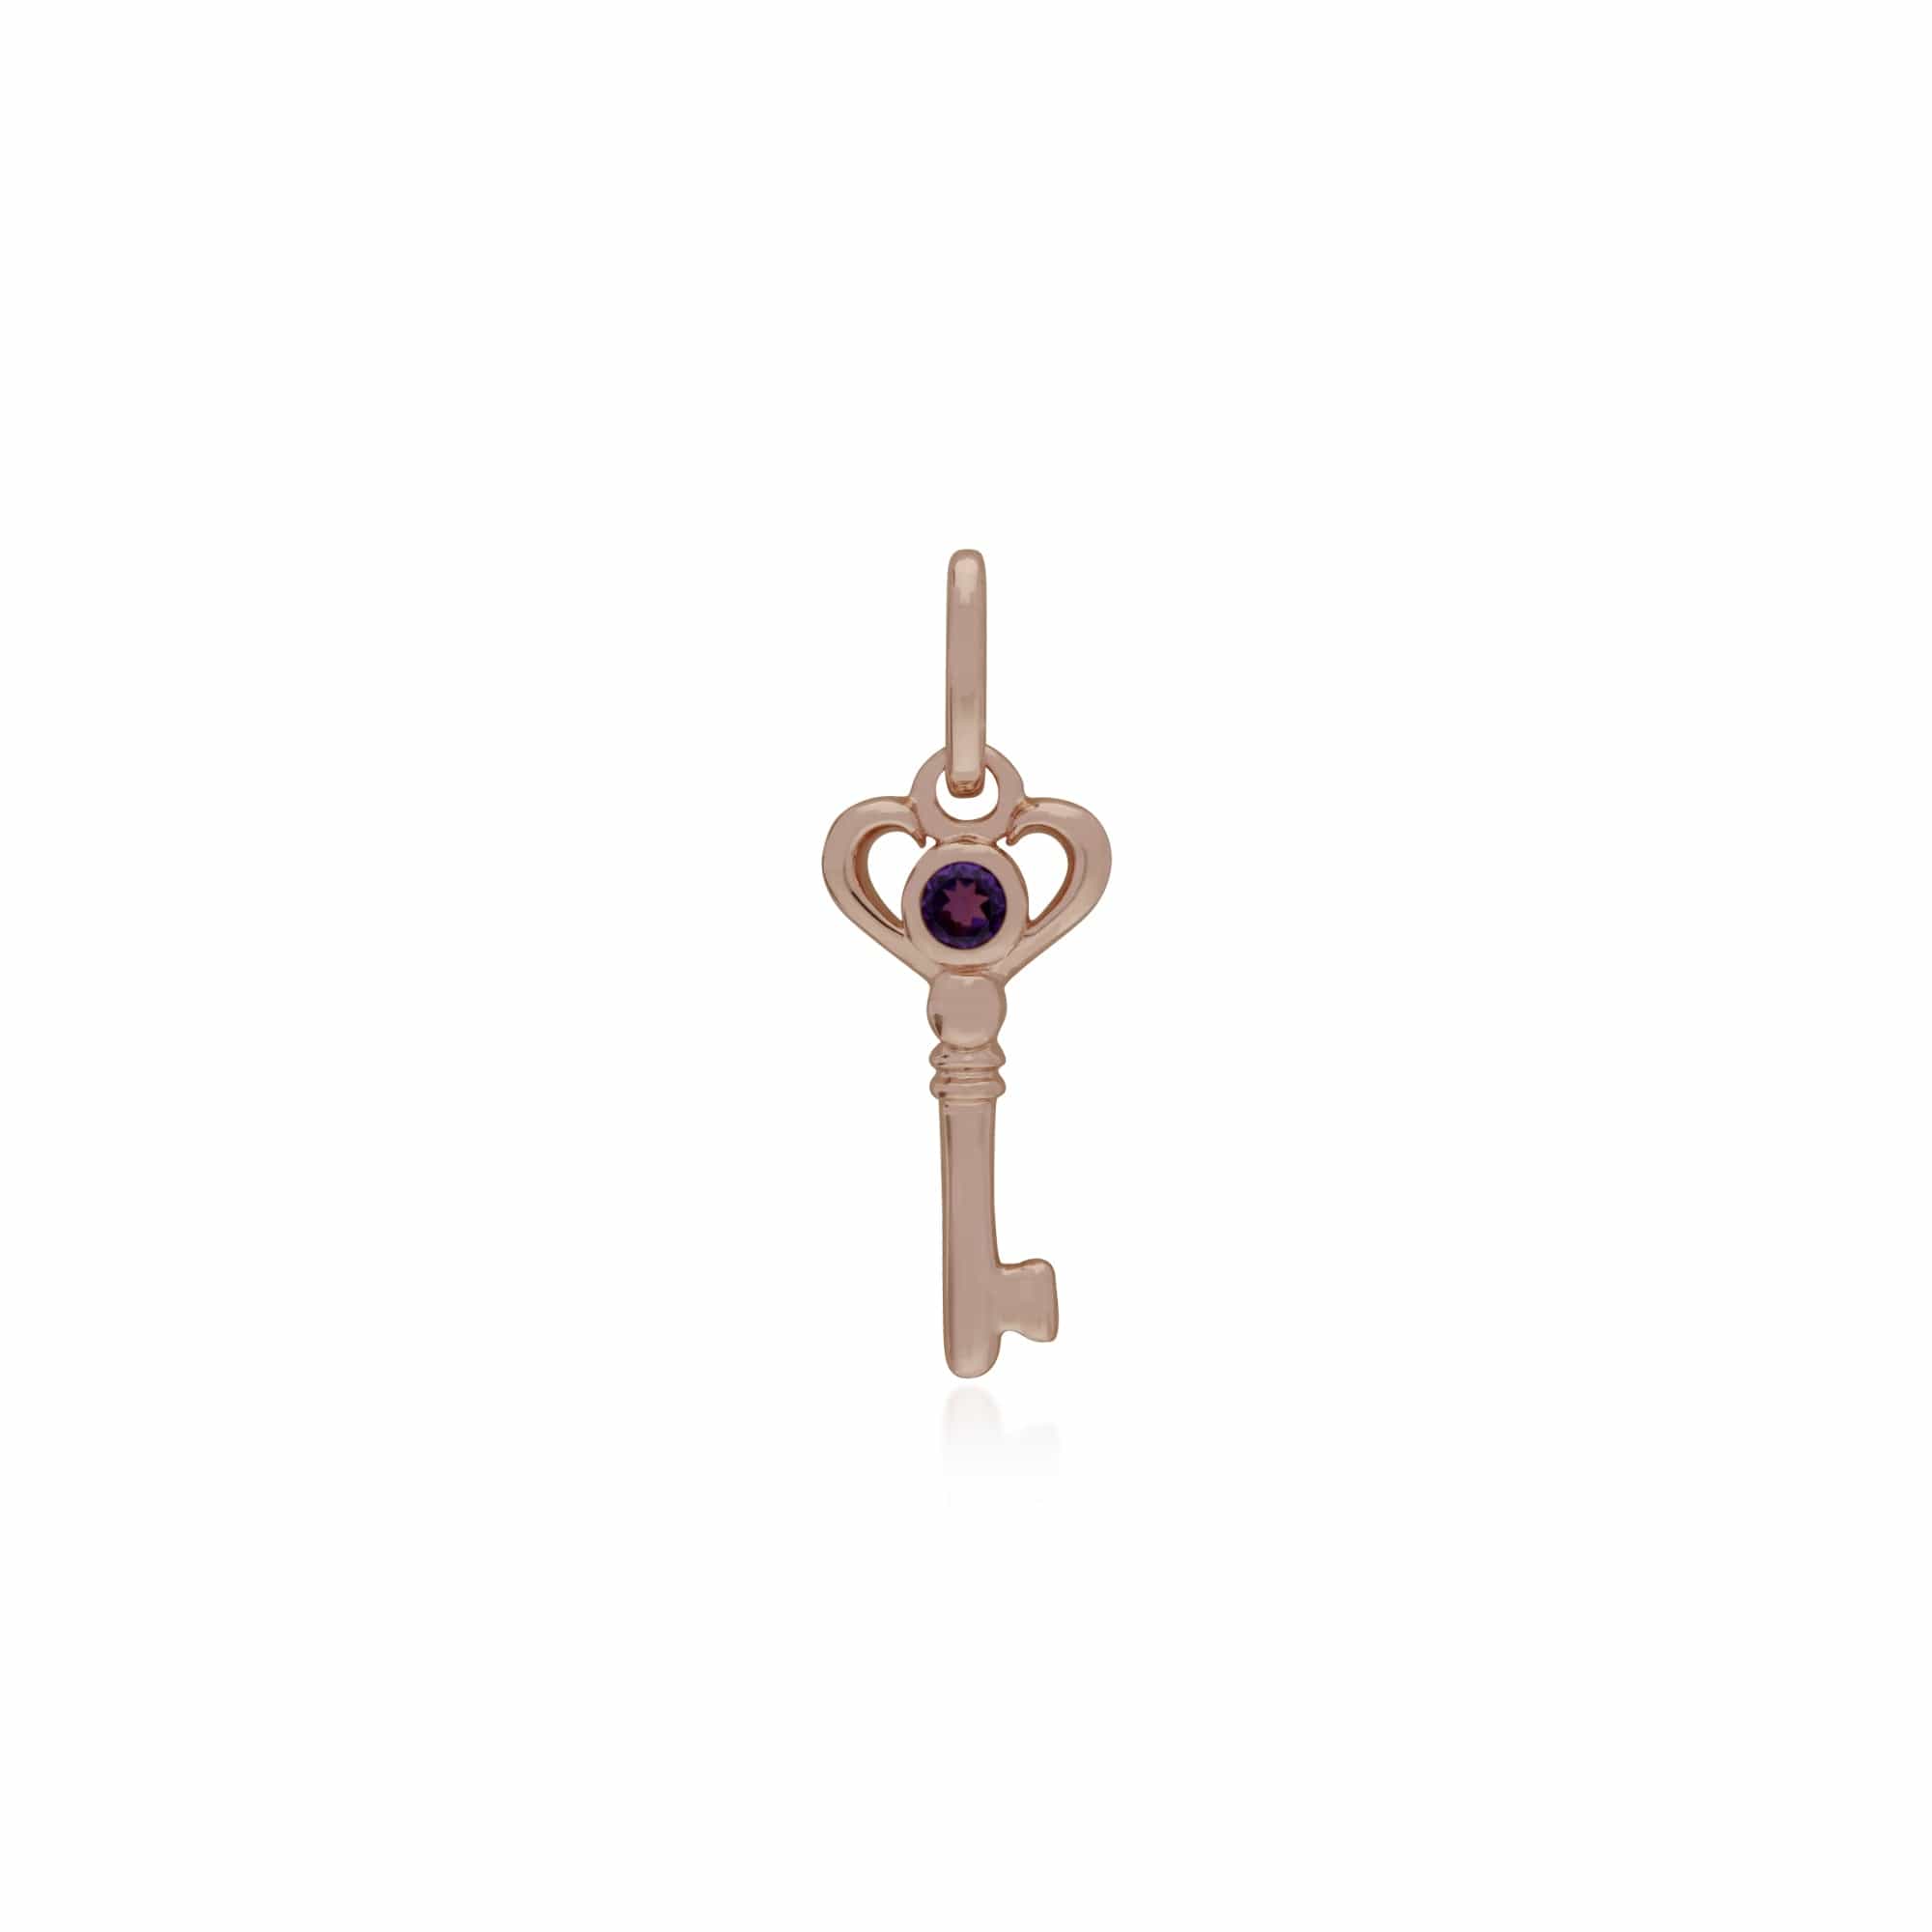 270P026304925-270P026501925 Classic Swirl Heart Lock Pendant & Amethyst Key Charm in Rose Gold Plated 925 Sterling Silver 2